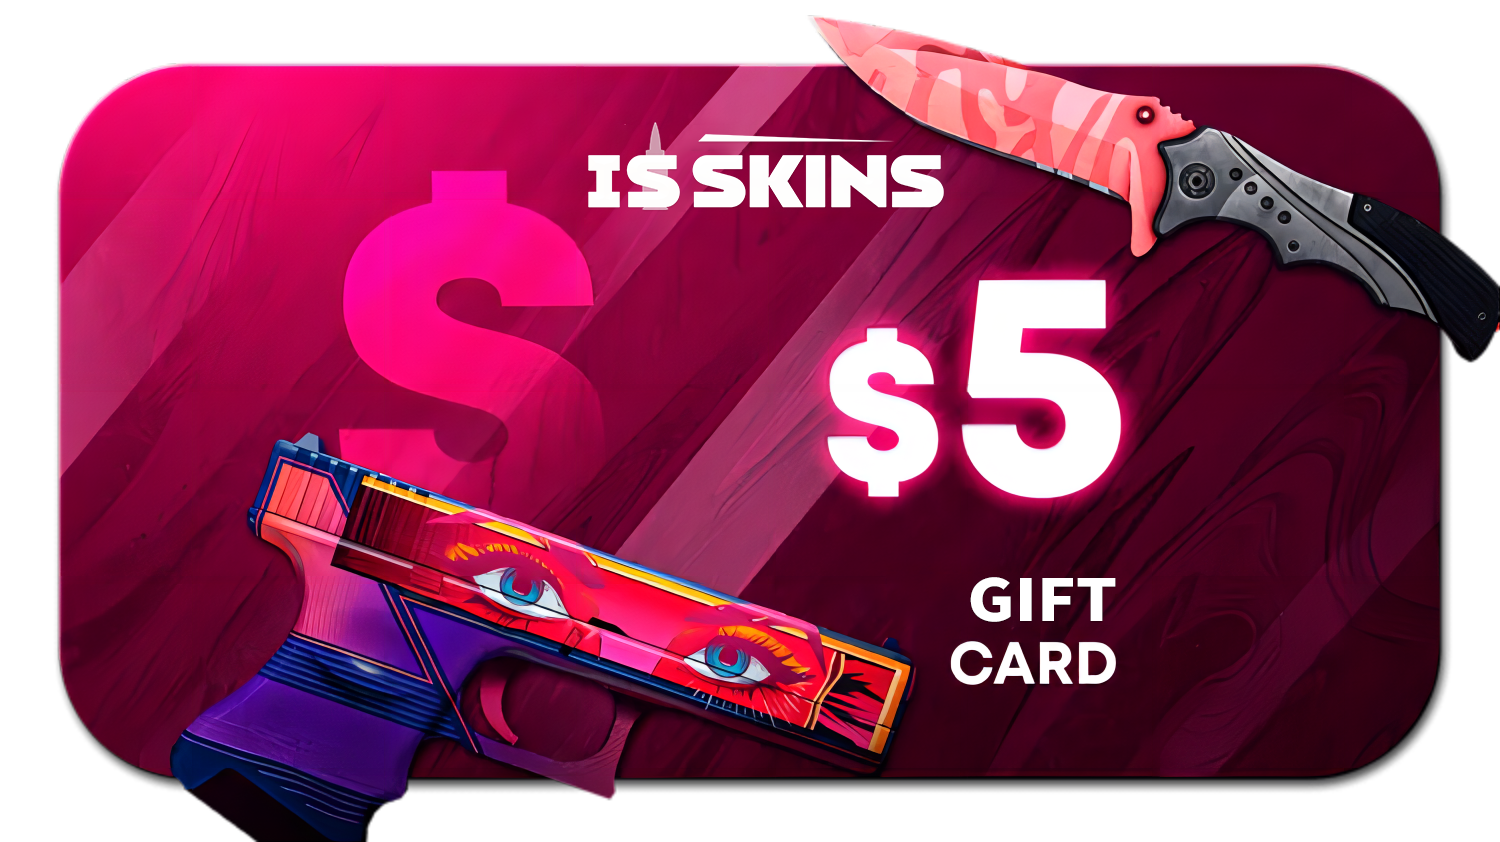 ISSKINS $5 Gift Card, 5.29 usd